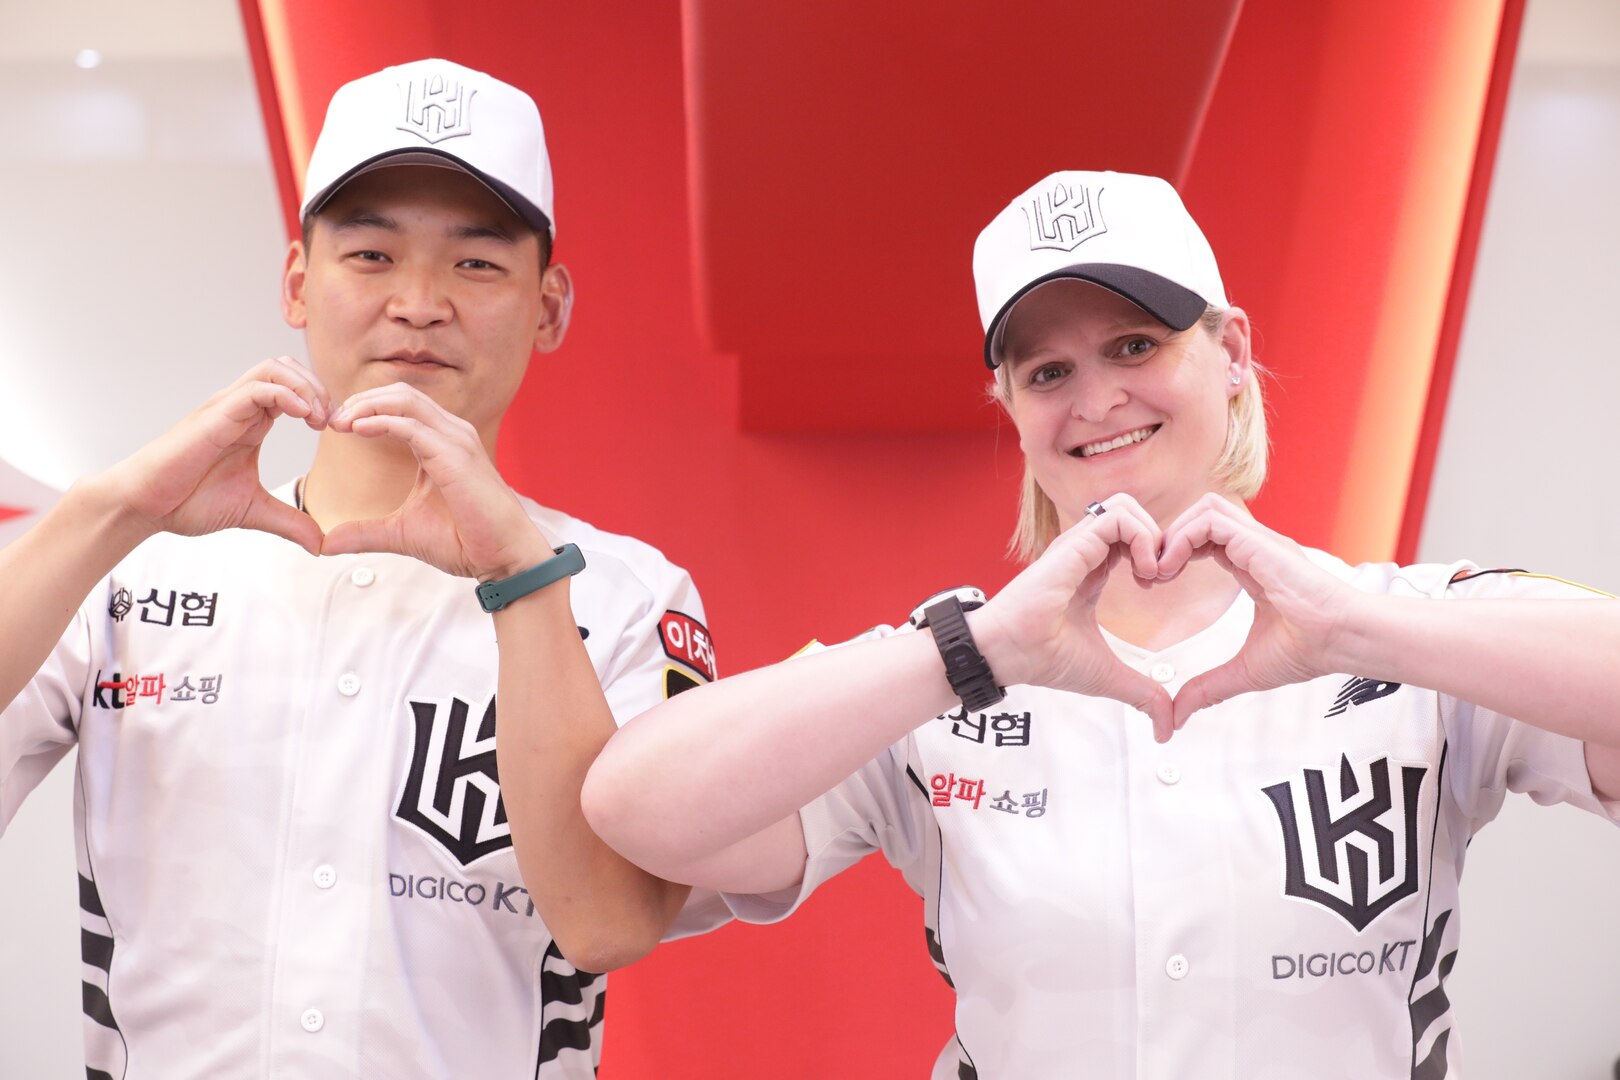 Lt. Col. Miranda Killingsworth and Capt. (P) Ji Sang-gon will serve as the honorary batter and pitcher during a baseball game at KT Wiz Park between the Suwon-KT Wiz and LG Twins Baseball Club.